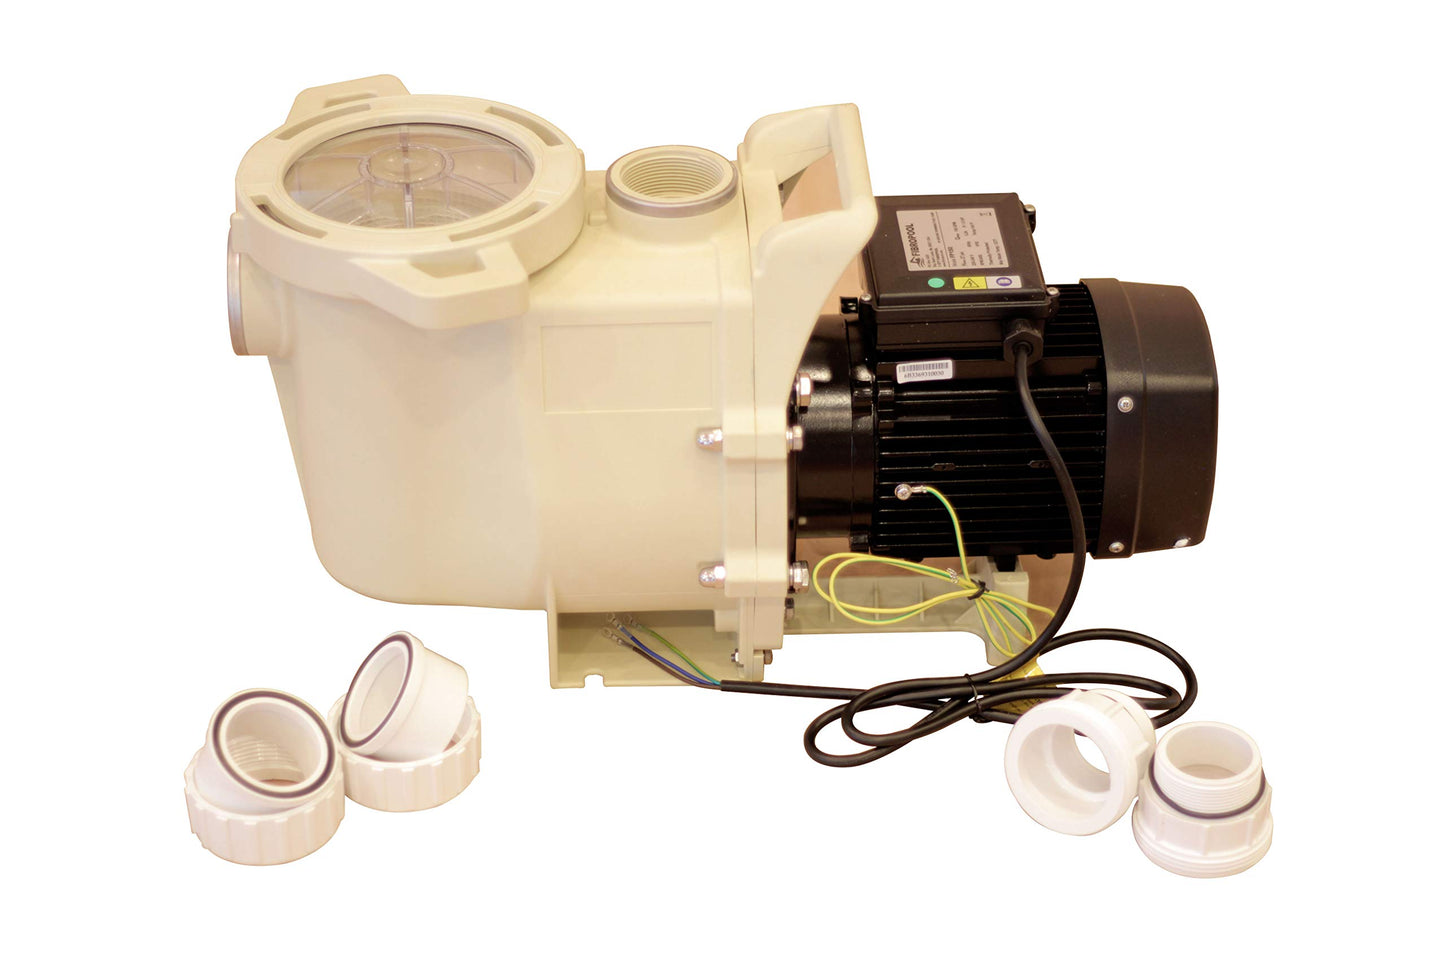 FibroPool 1.5 HP Swimming Pool Pump for In Ground Pools and Spas - 1.5 Horsepower - Designed in the USA - High Efficiency Single Speed Motor With Clear Top Lid - FP150